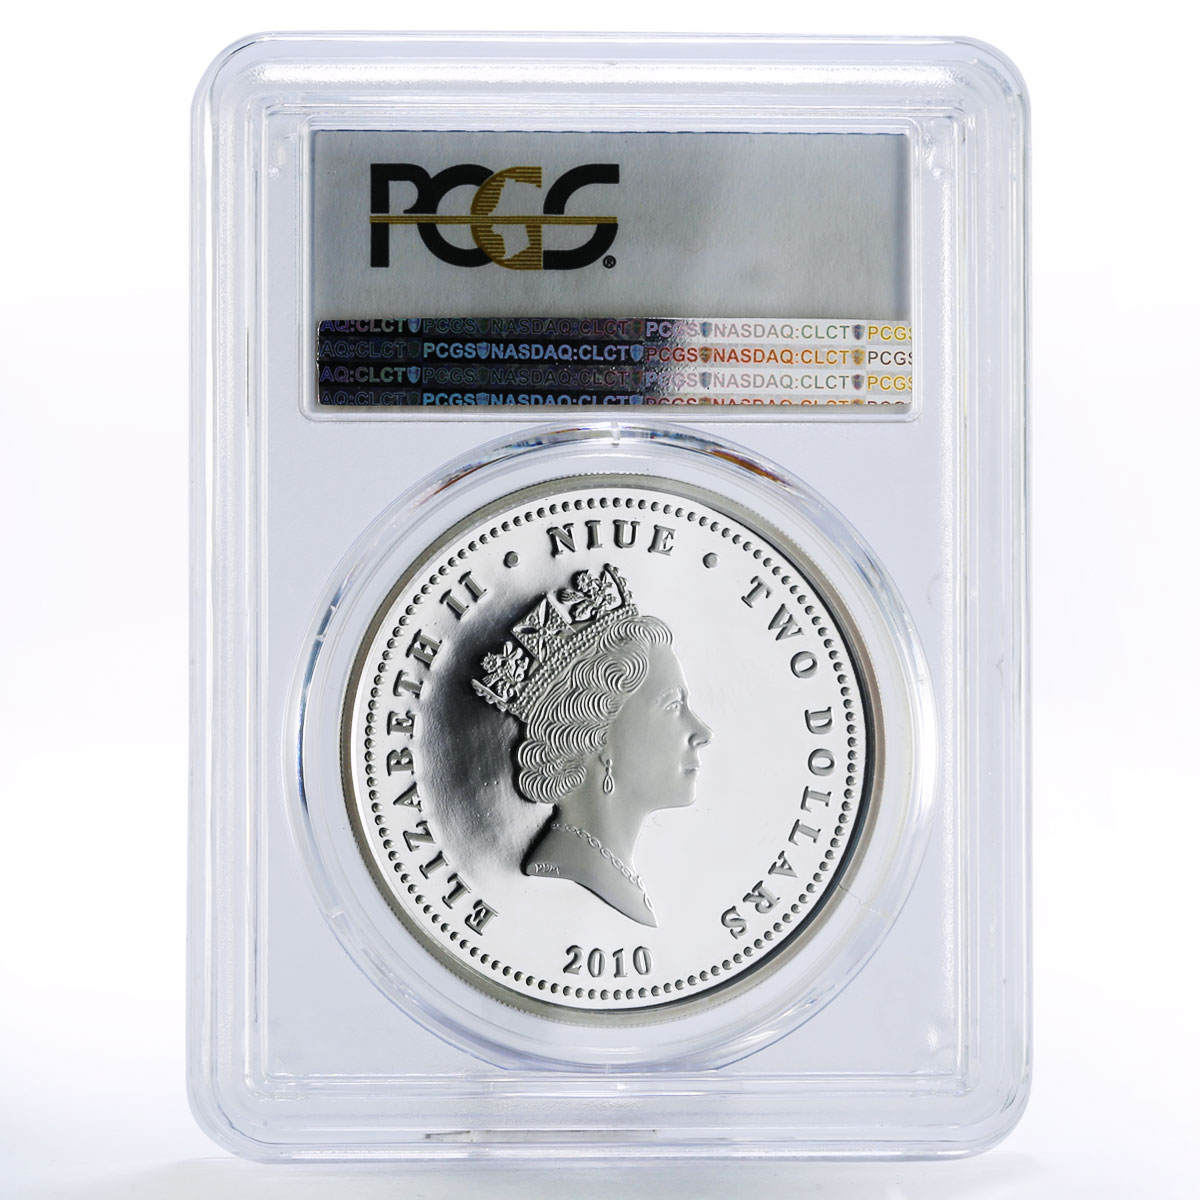 Niue 2 dollars Famous Express Train Limited PR69 PCGS proof silver coin 2010